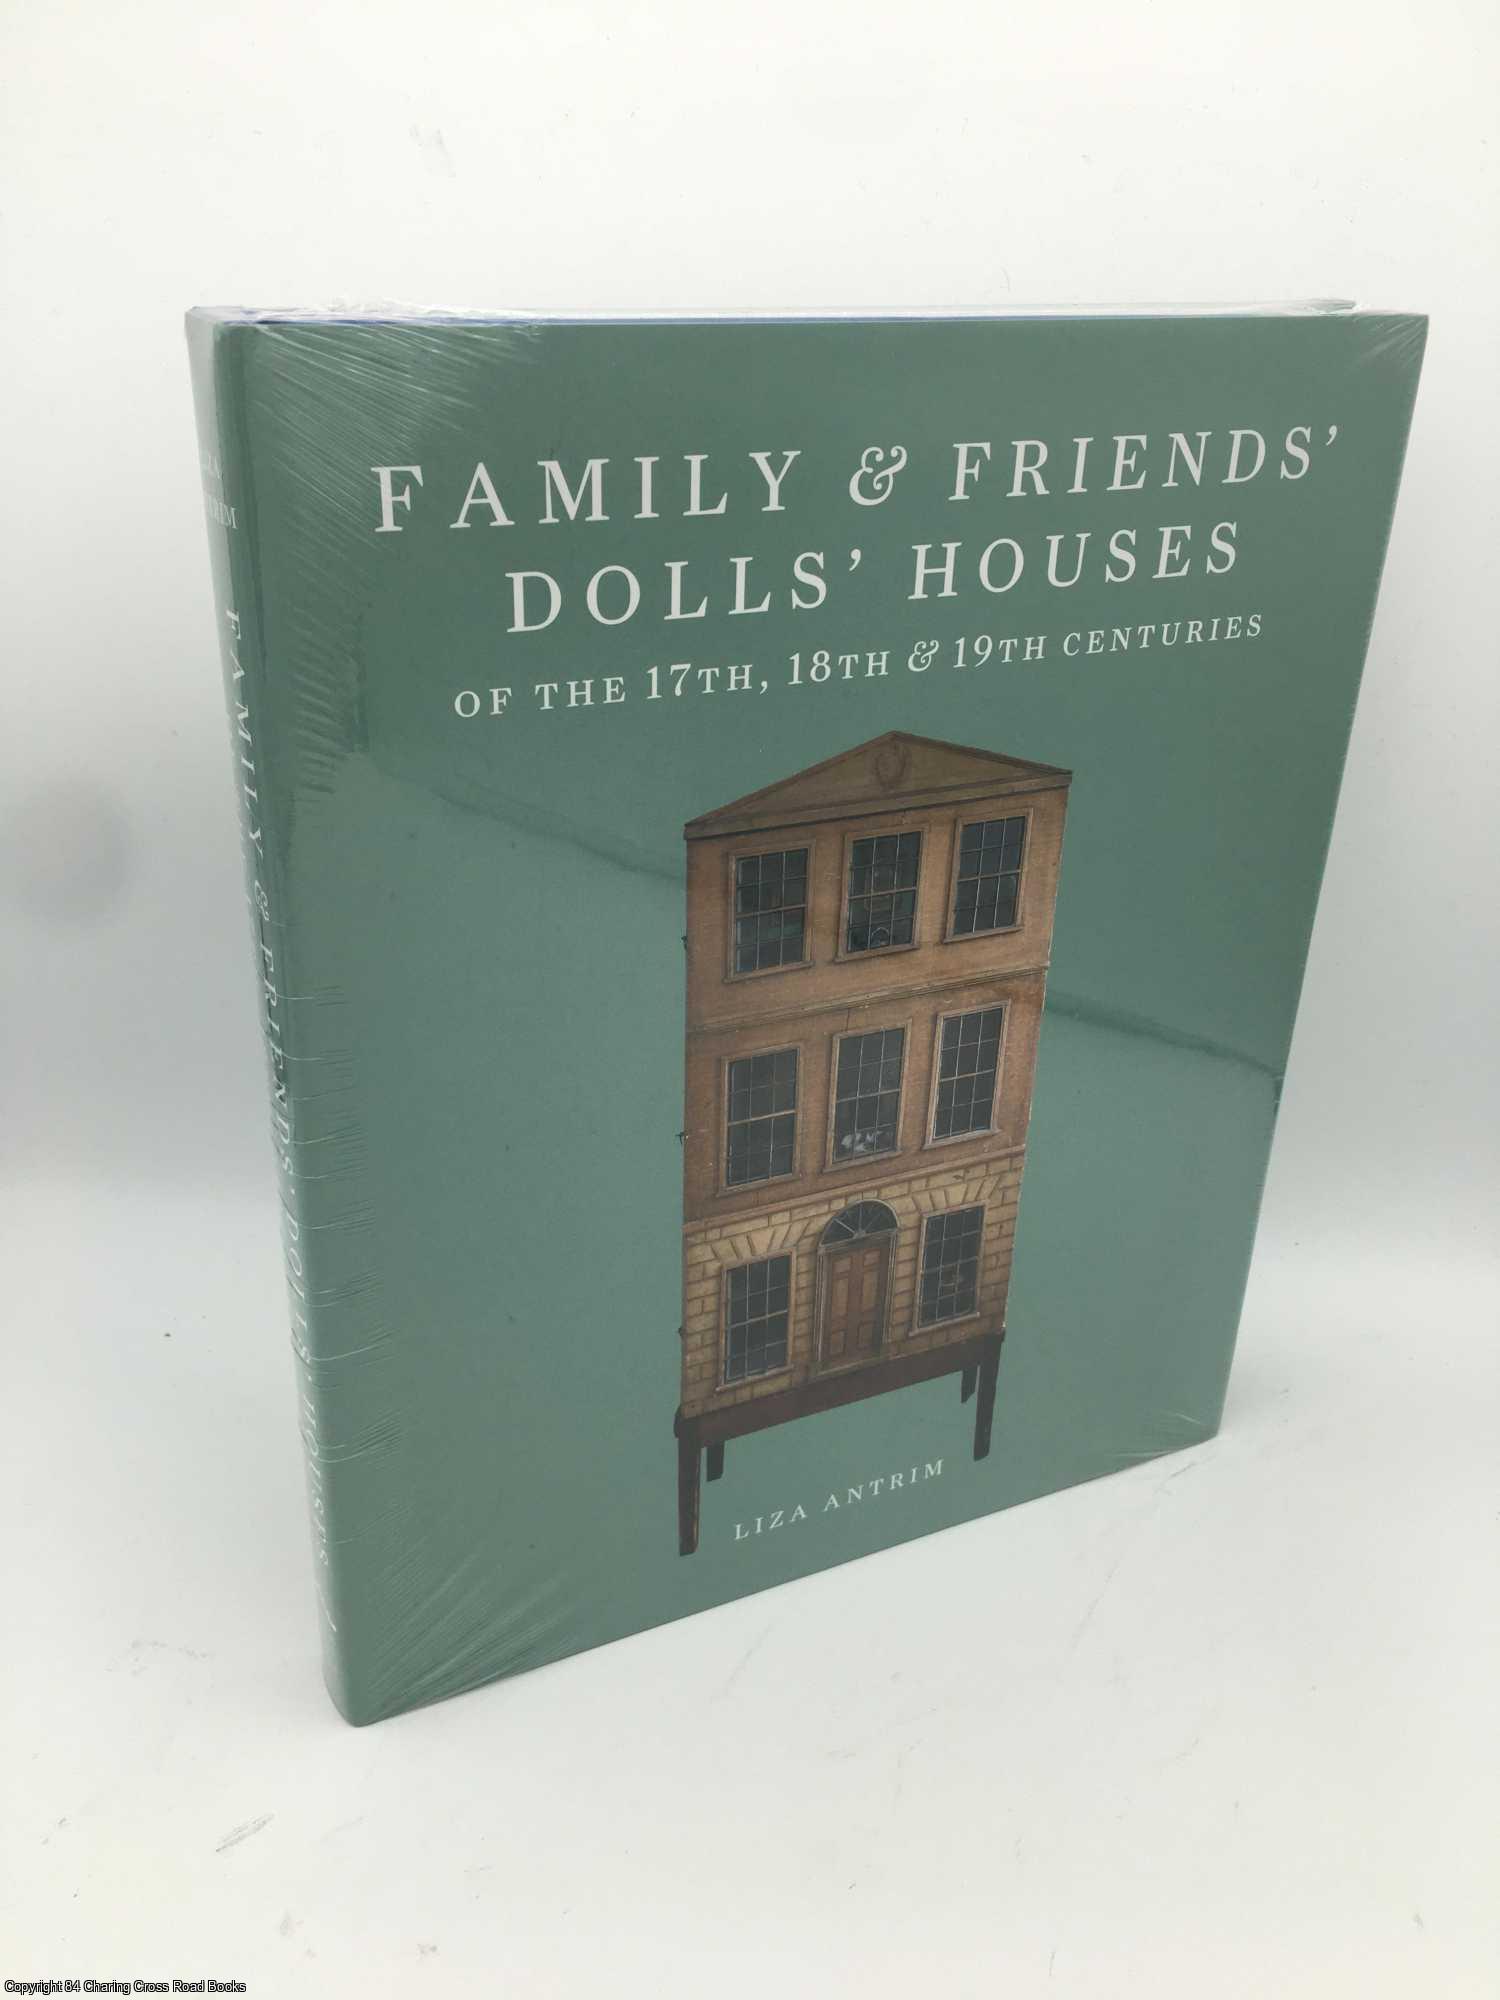 Antrim, Liza - Family & Friends' Dolls' Houses of the 17th, 18th & 19th Centuries